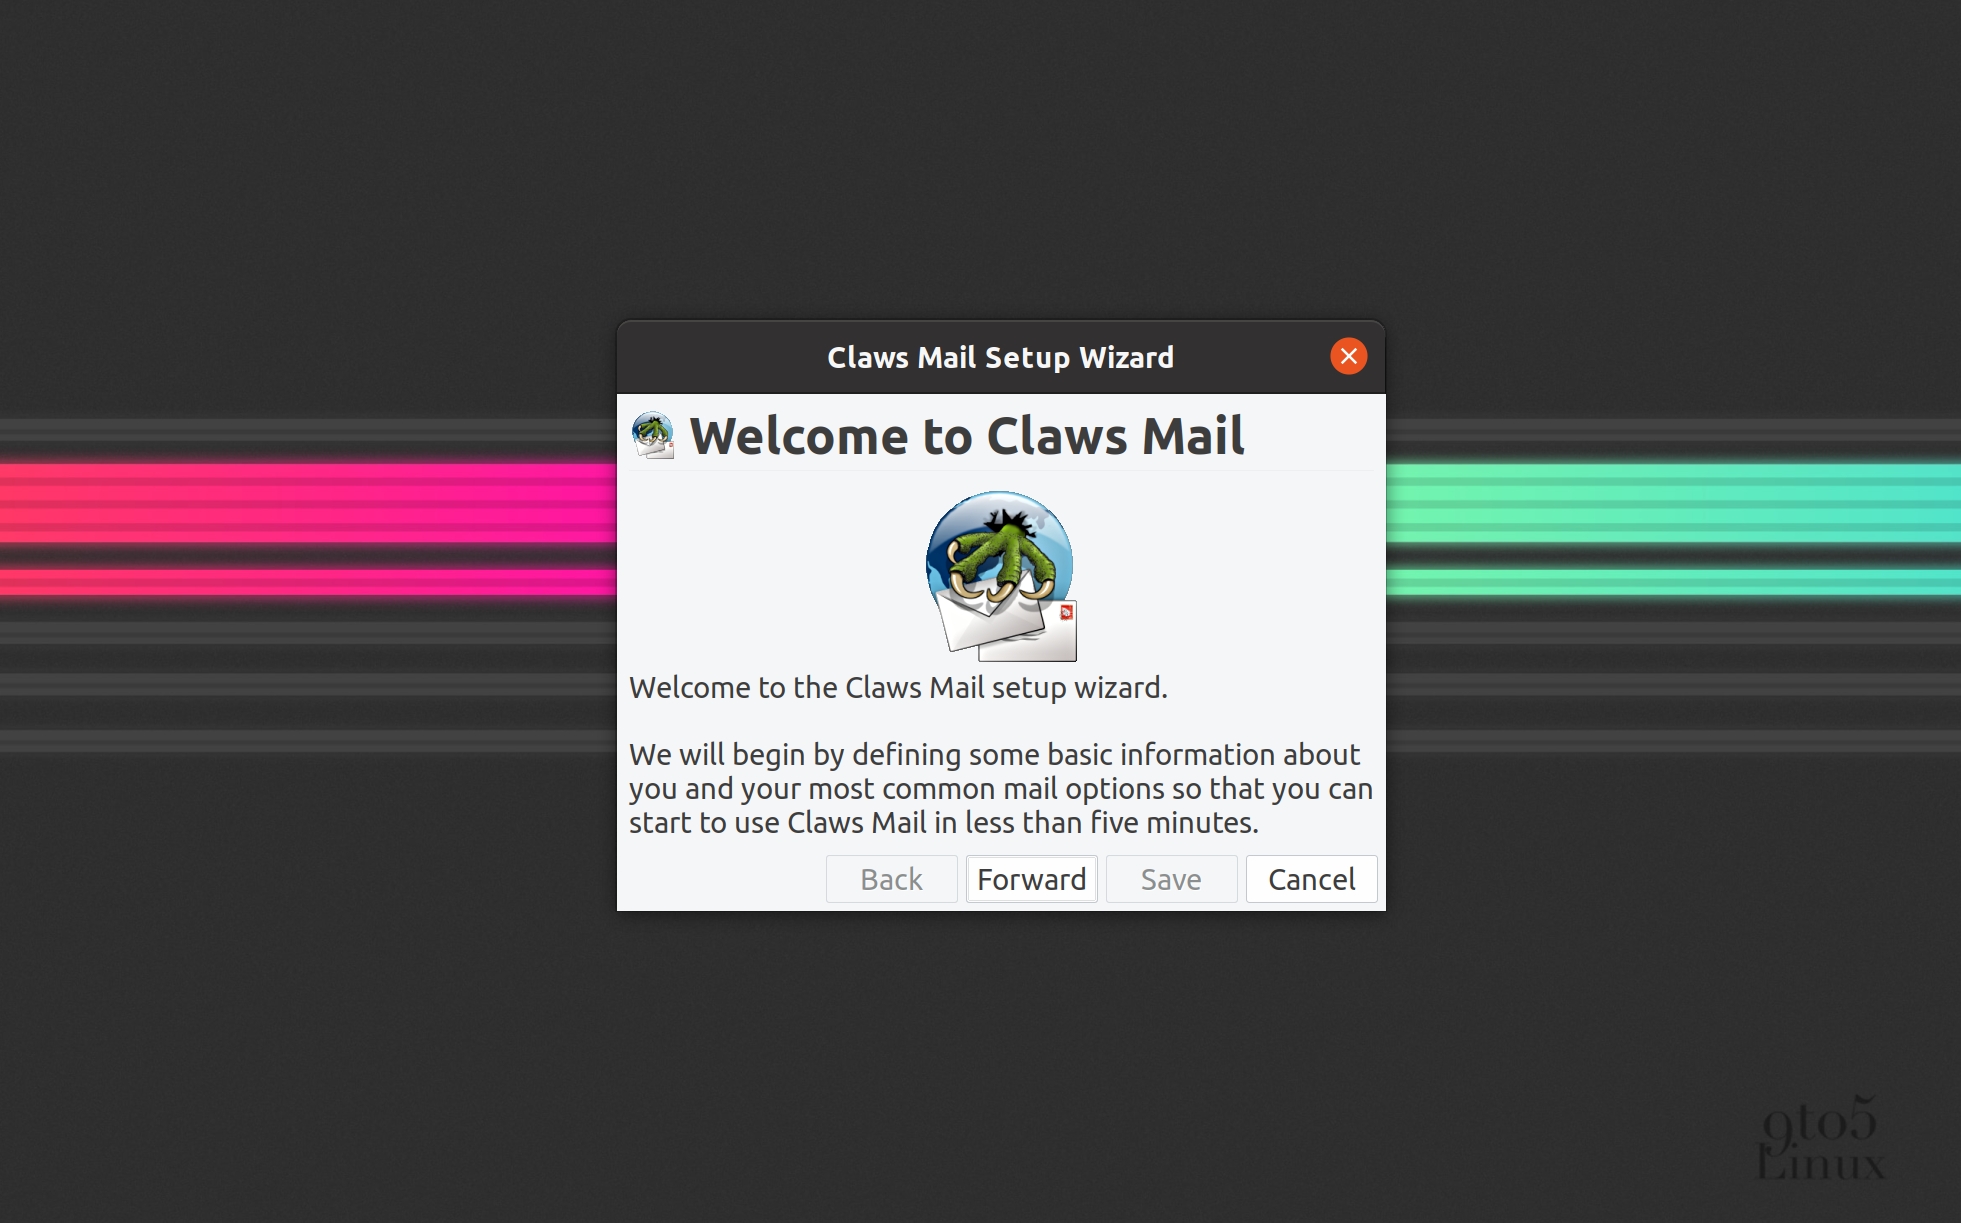 Claws Mail 3.17.6 Released with Phishing URL Warning, More Privacy Options